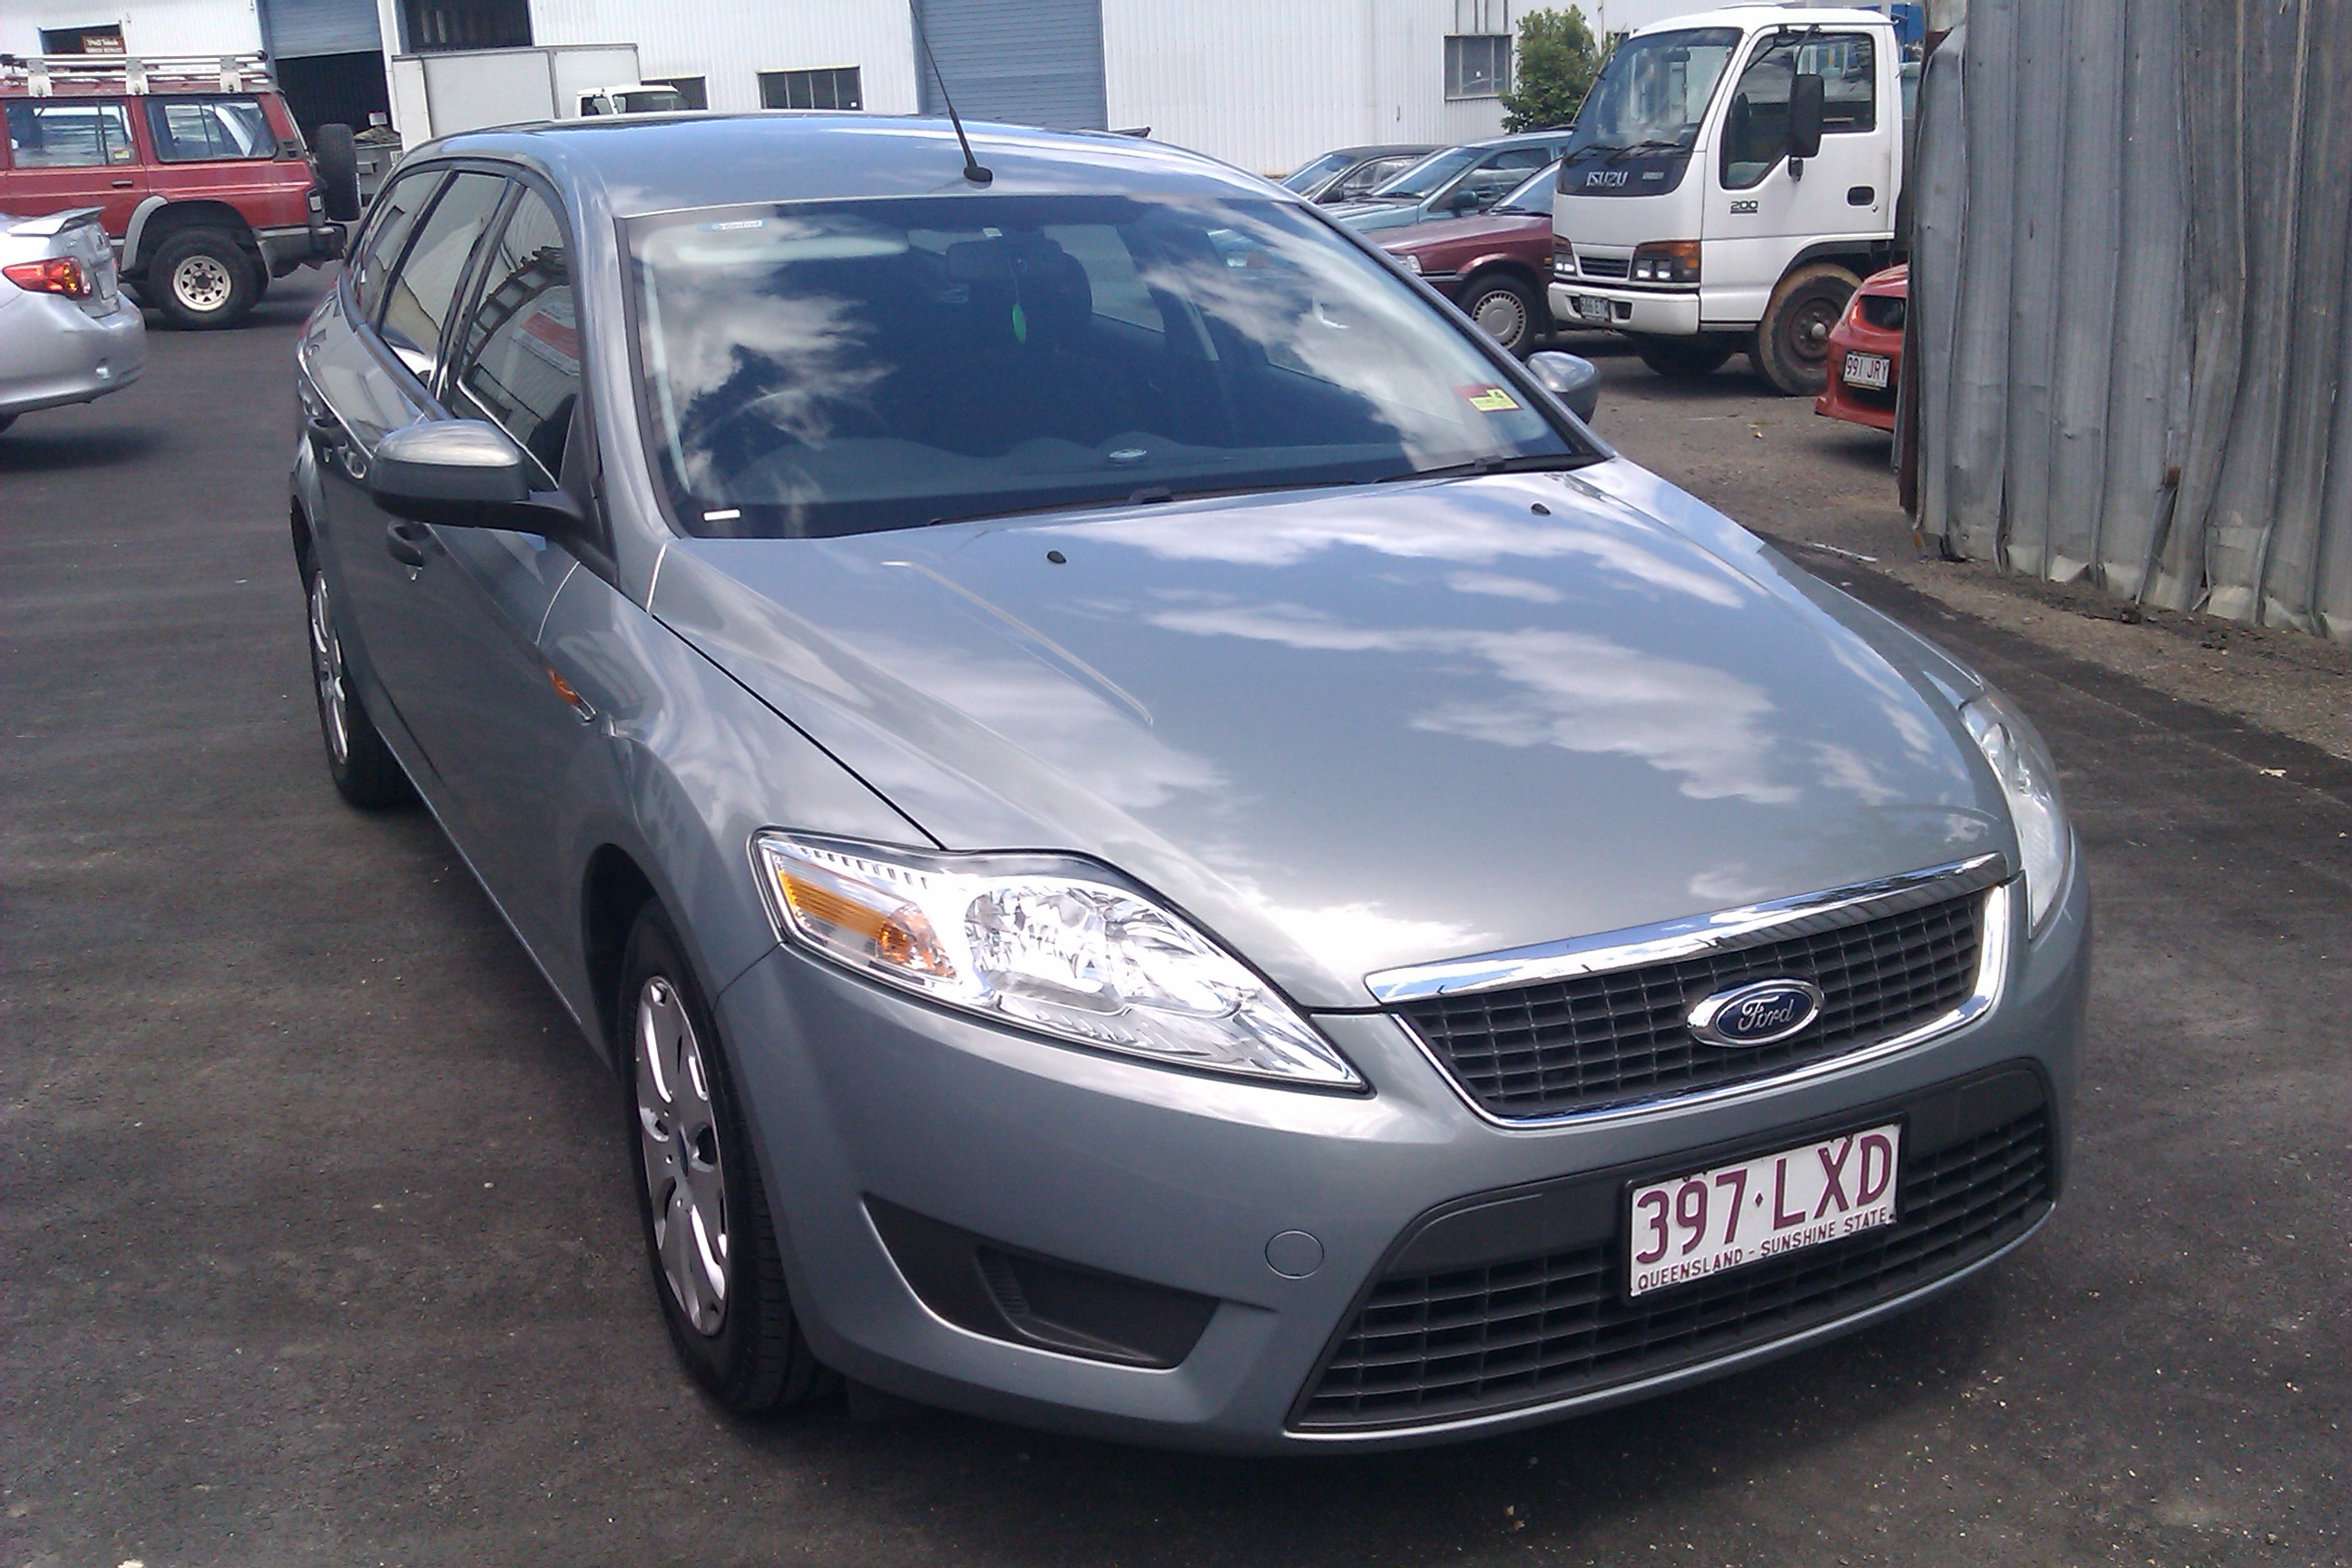 2009 Ford mondeo mb lx station wagon #1